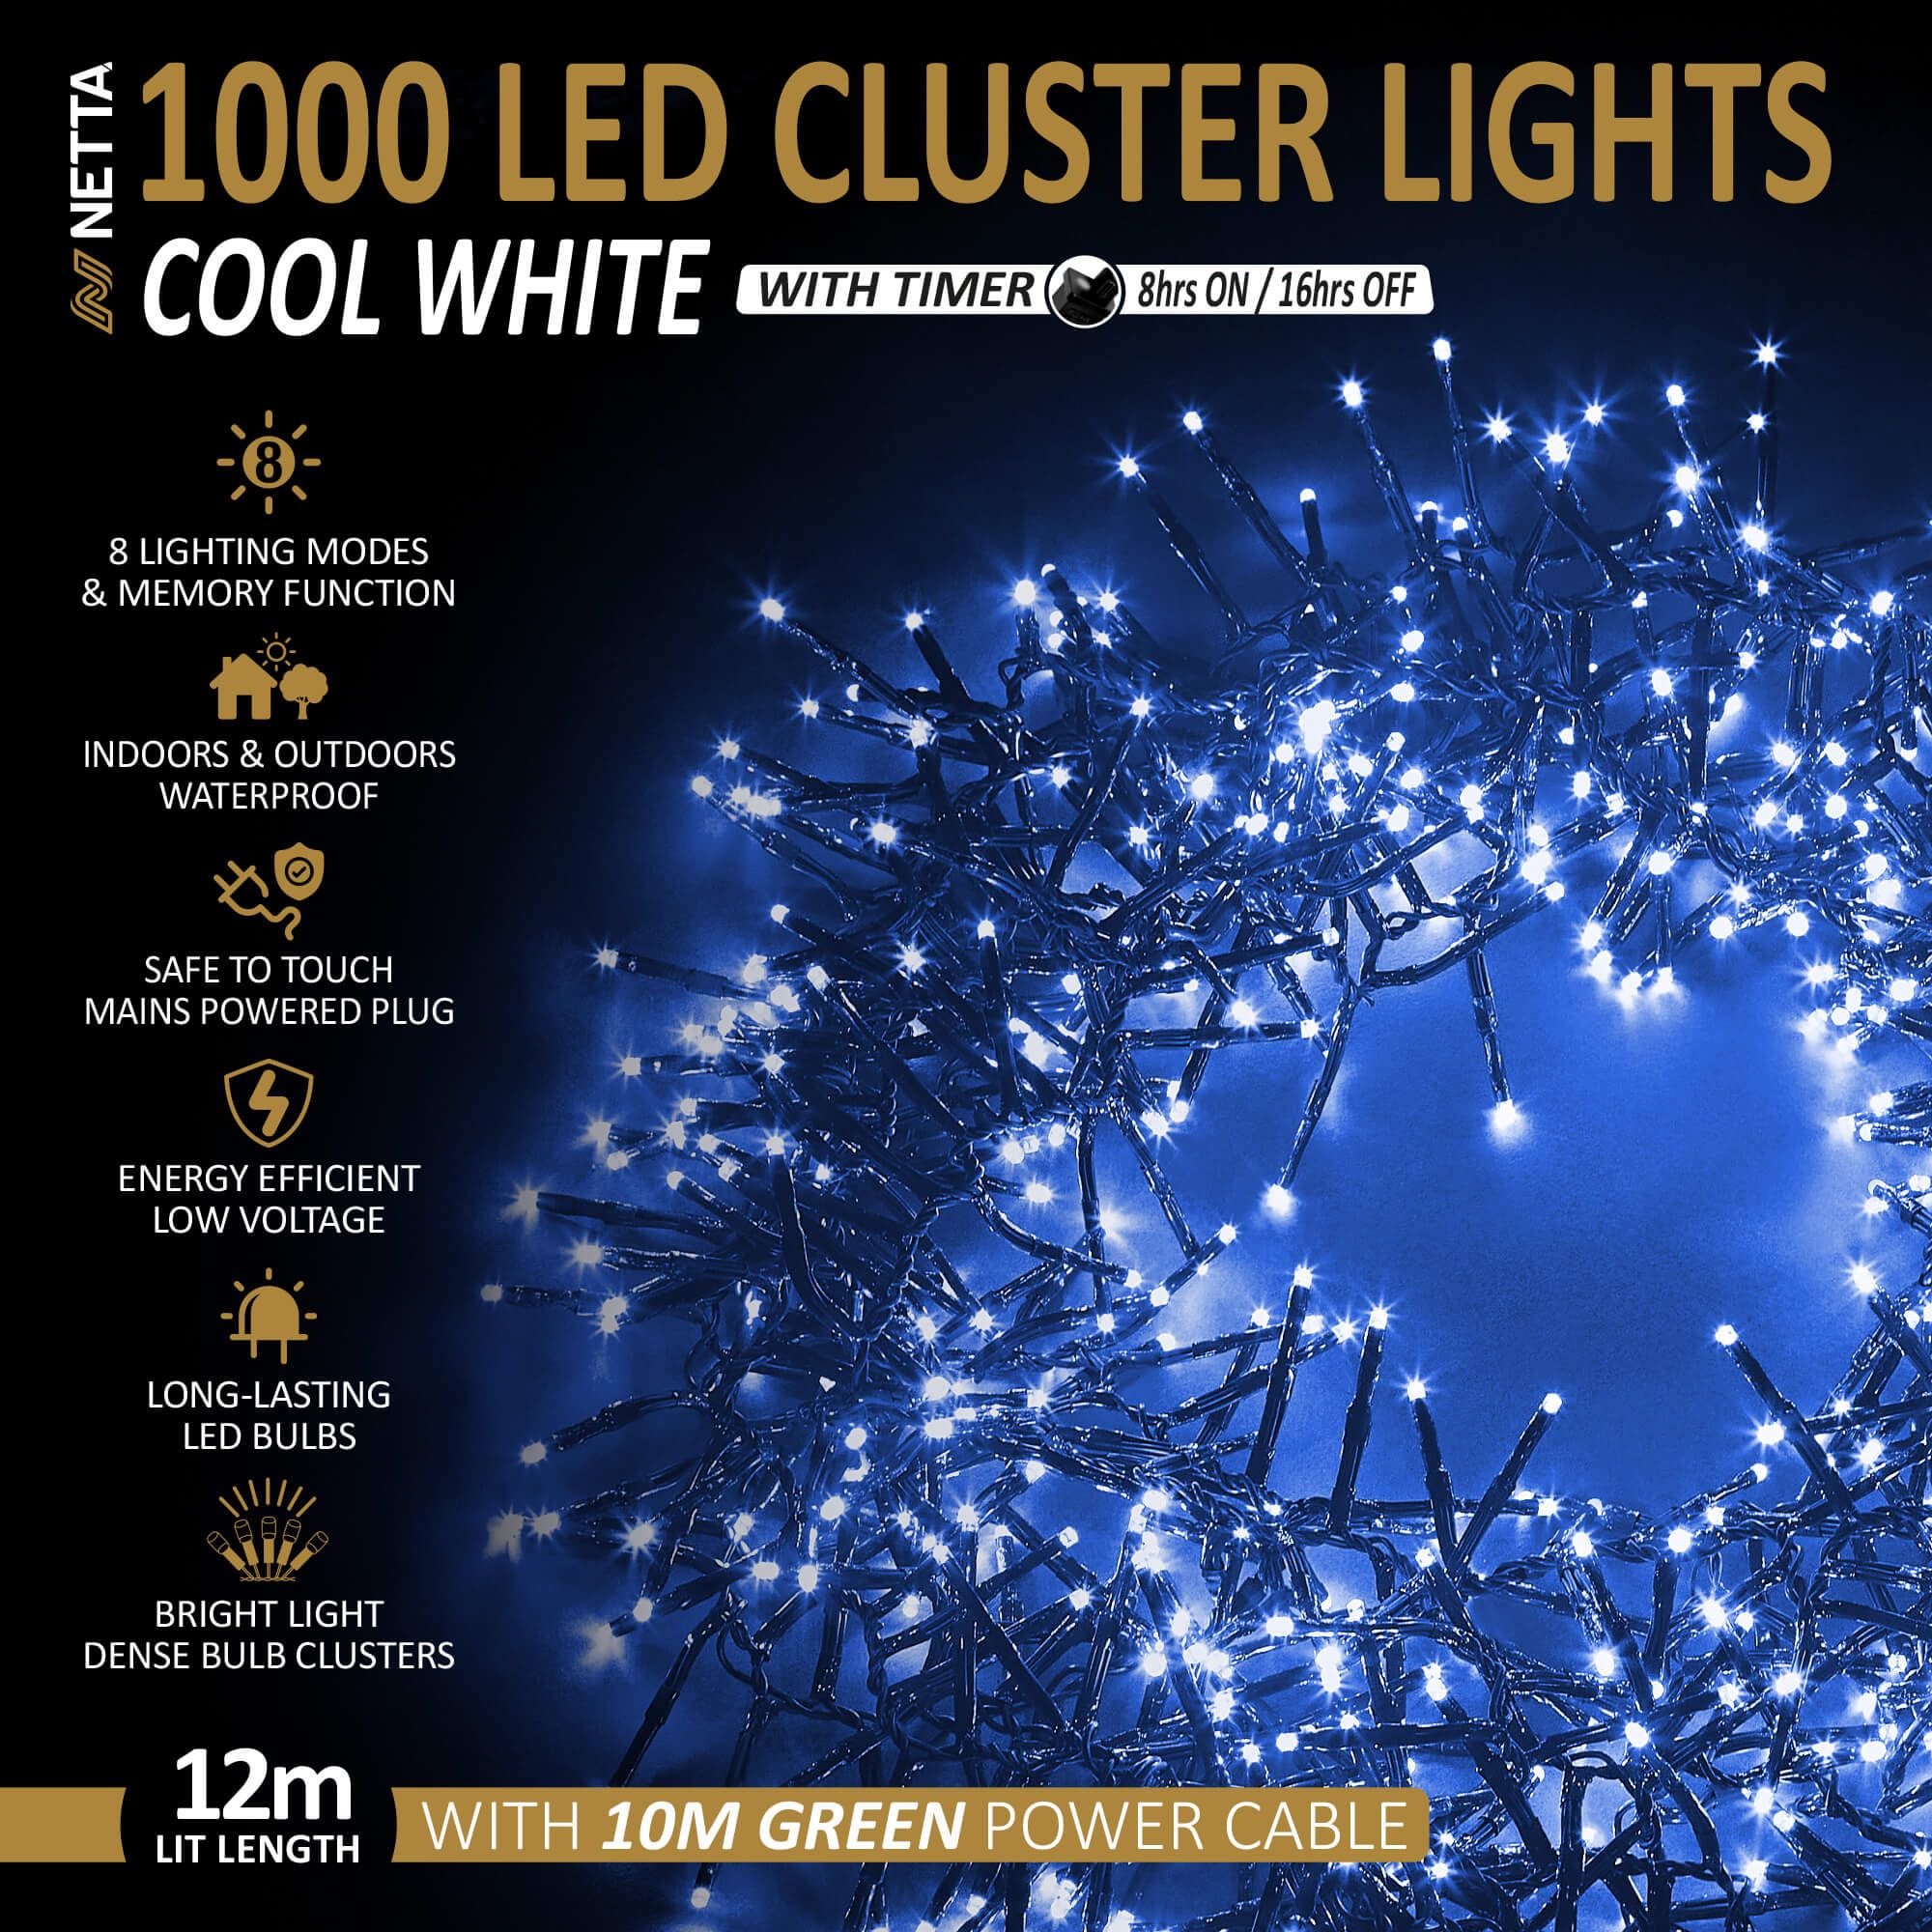 NETTA 1000 LED 12M Cluster String Lights Outdoor and Indoor Plug In - Cool White